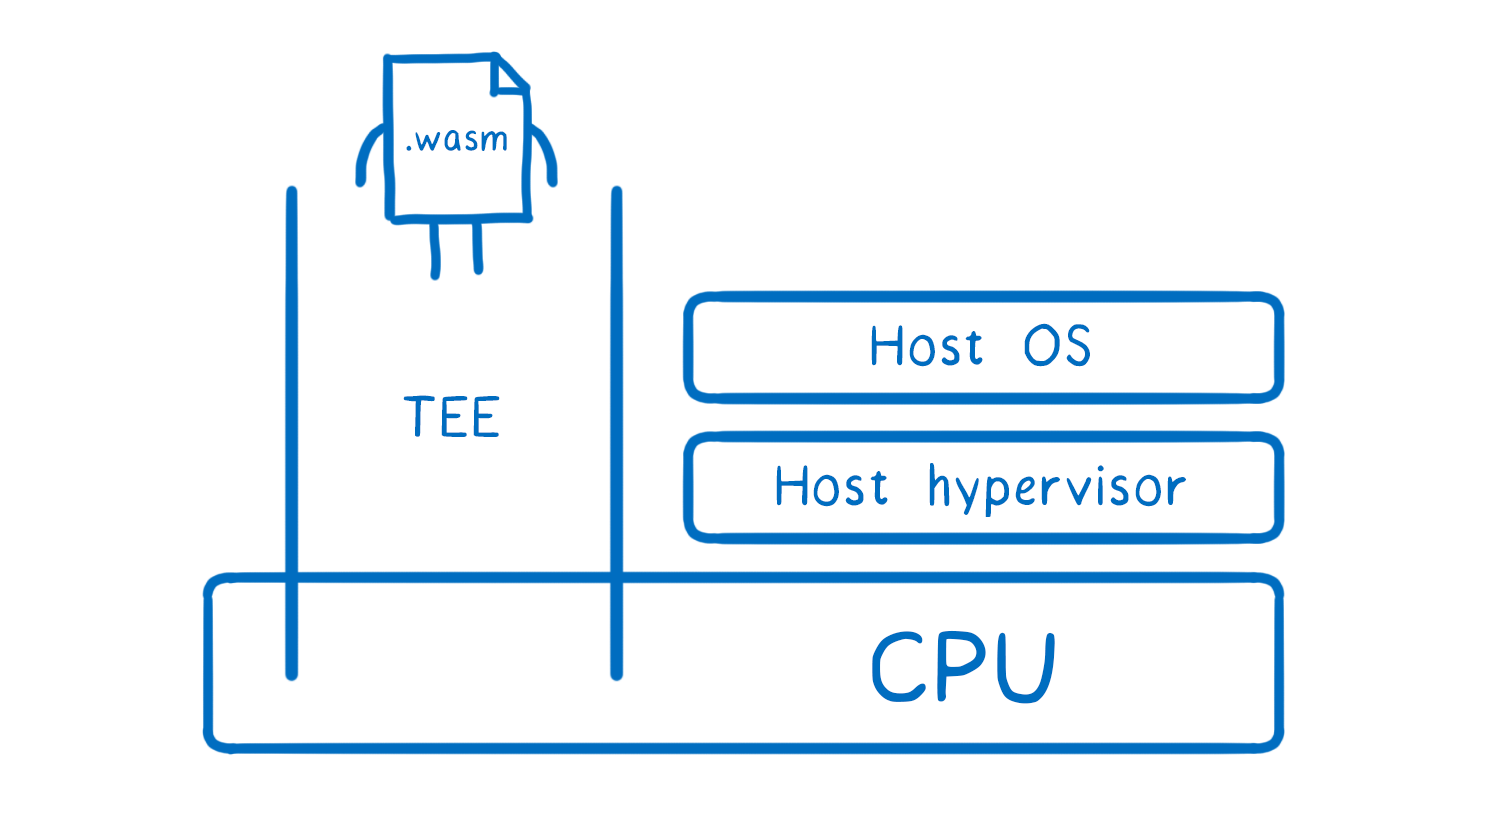 A CPU with a hypervisor and OS sitting on top of it, plus another, cordoned off section that contains the TEE with the WebAssembly code.